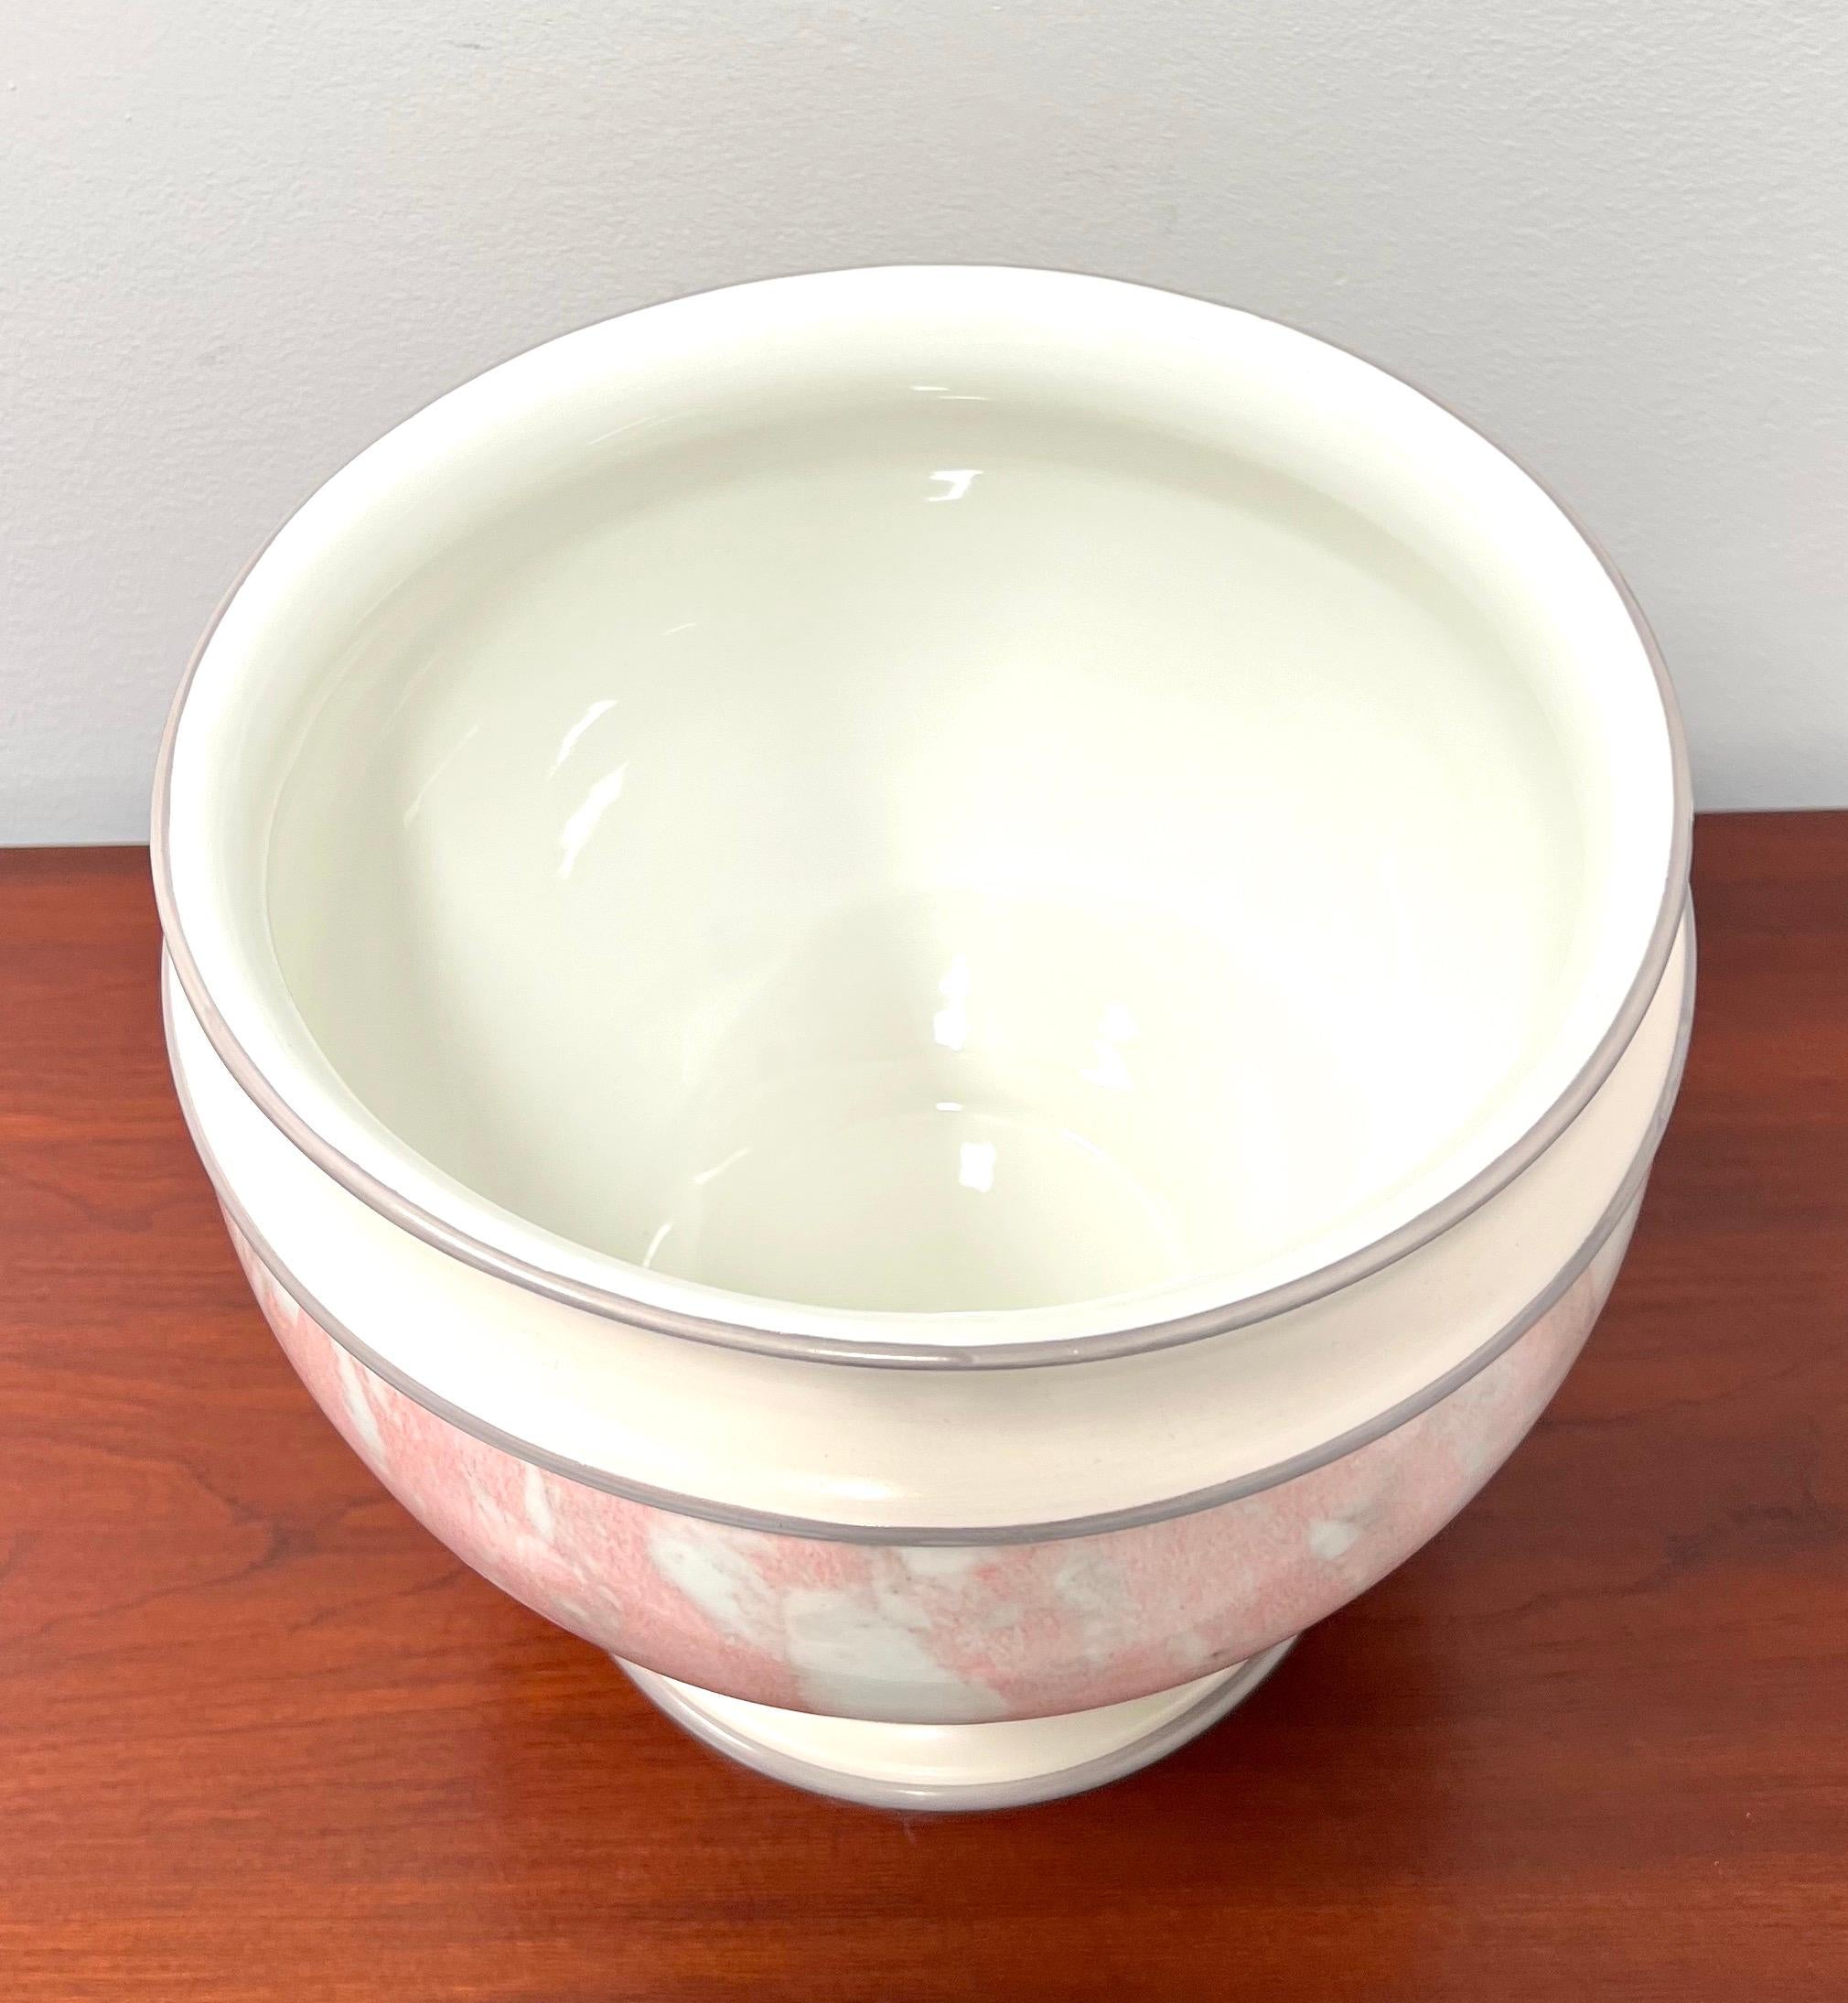 An Italian decorative porcelain centerpiece bowl, unbranded. A beautiful pink, white & gray color round porcelain bowl with a faux marble design, white color interior, and footed. Made in Italy, circa 1980's.

Measures:  10w 10d 9h, Weighs